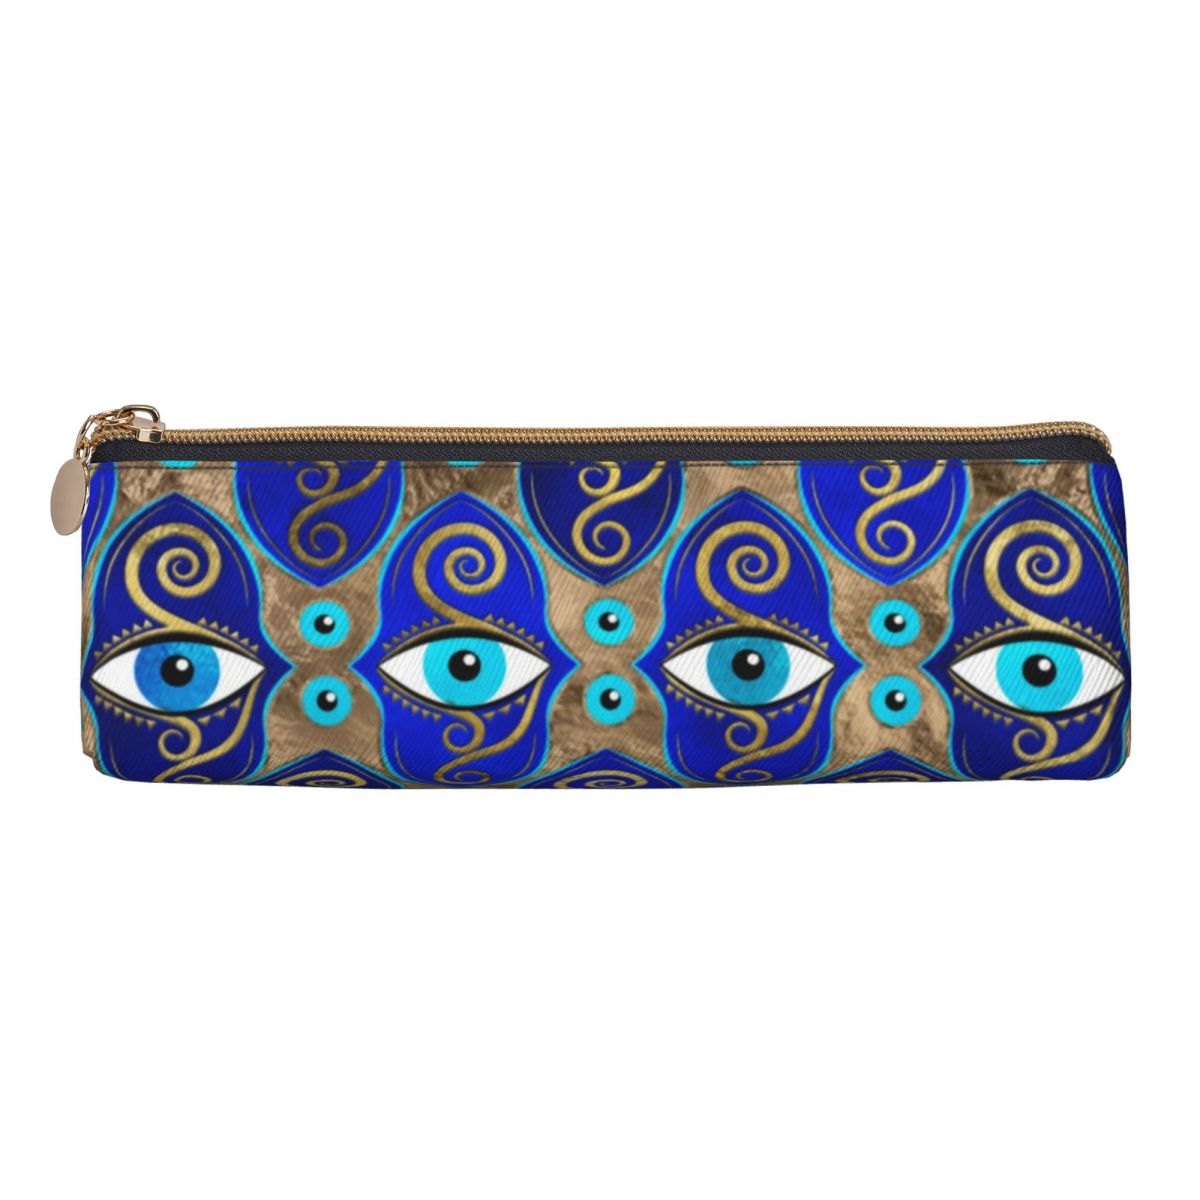 Eye Protection Amulet Design Pencil Case - Blue-Brown / One